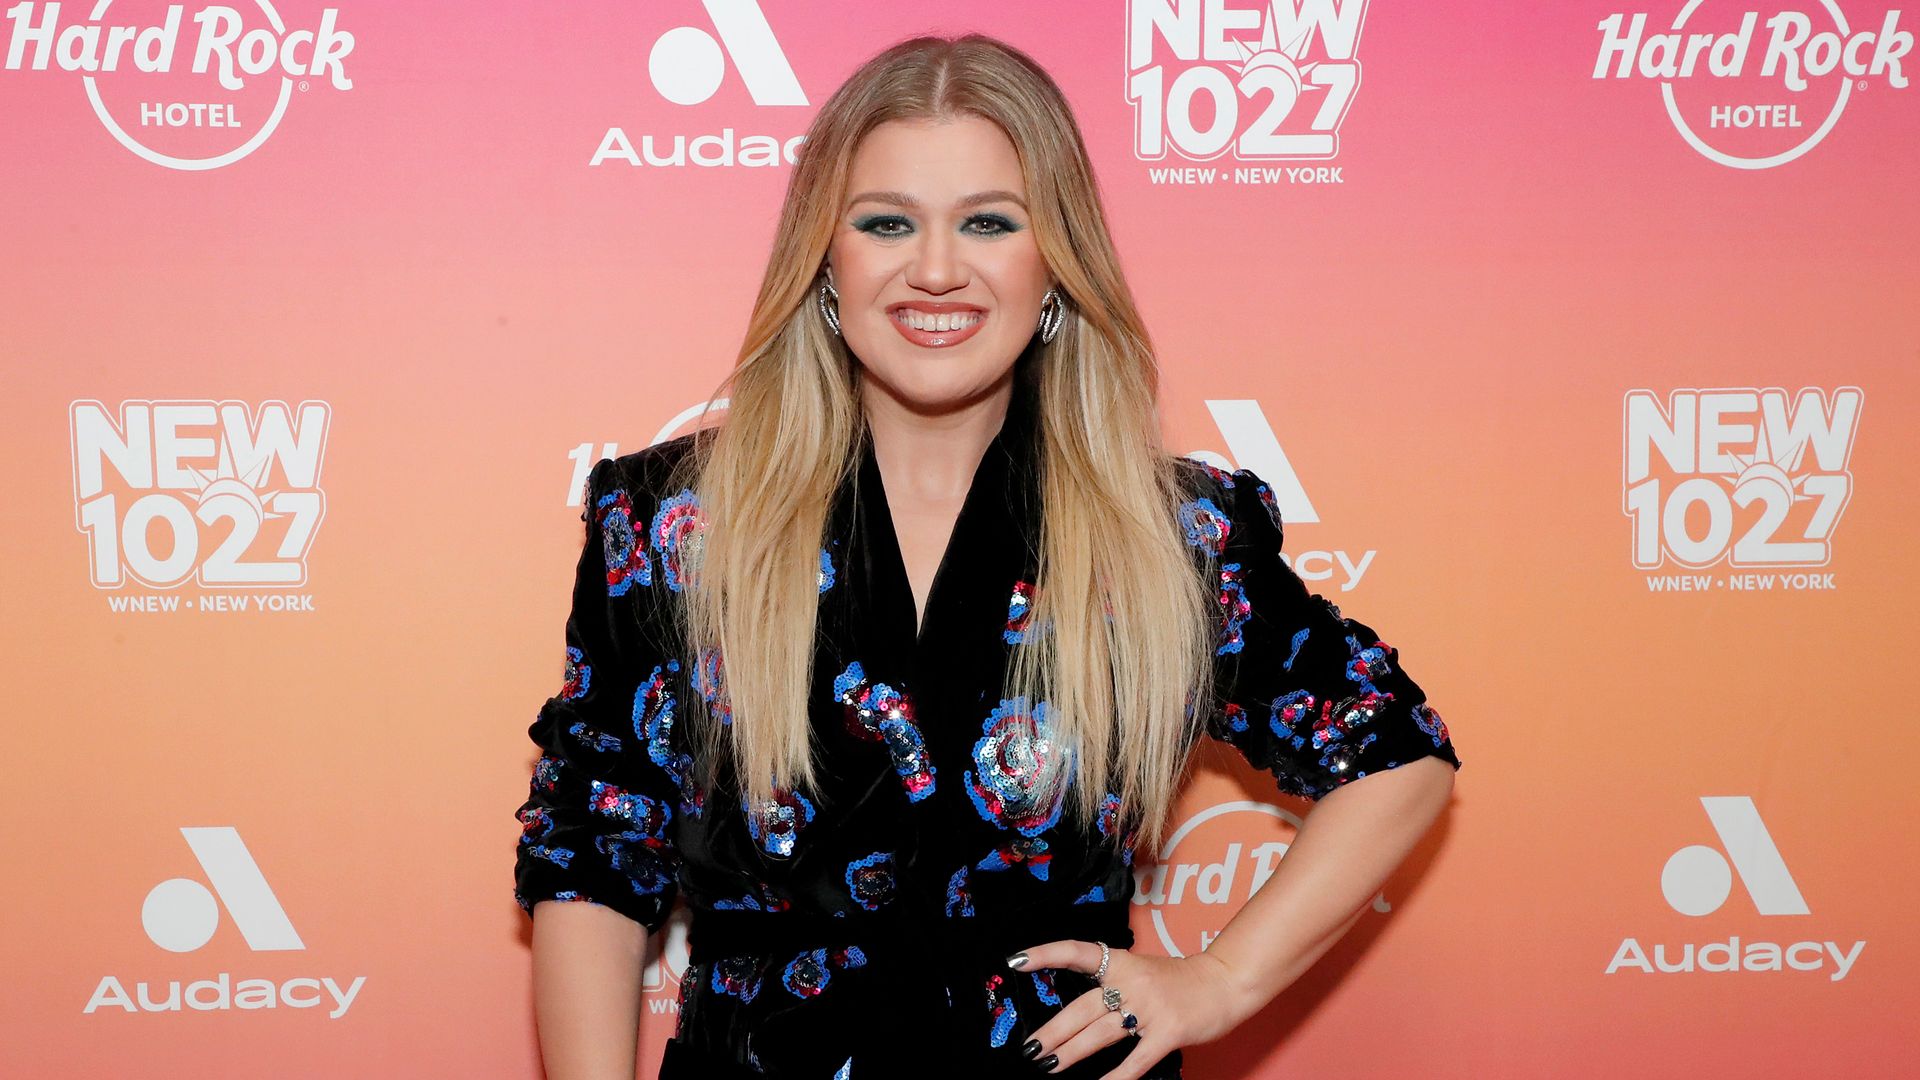 Kelly Clarkson enhances her slim physique in minuscule dress in head-turning new look